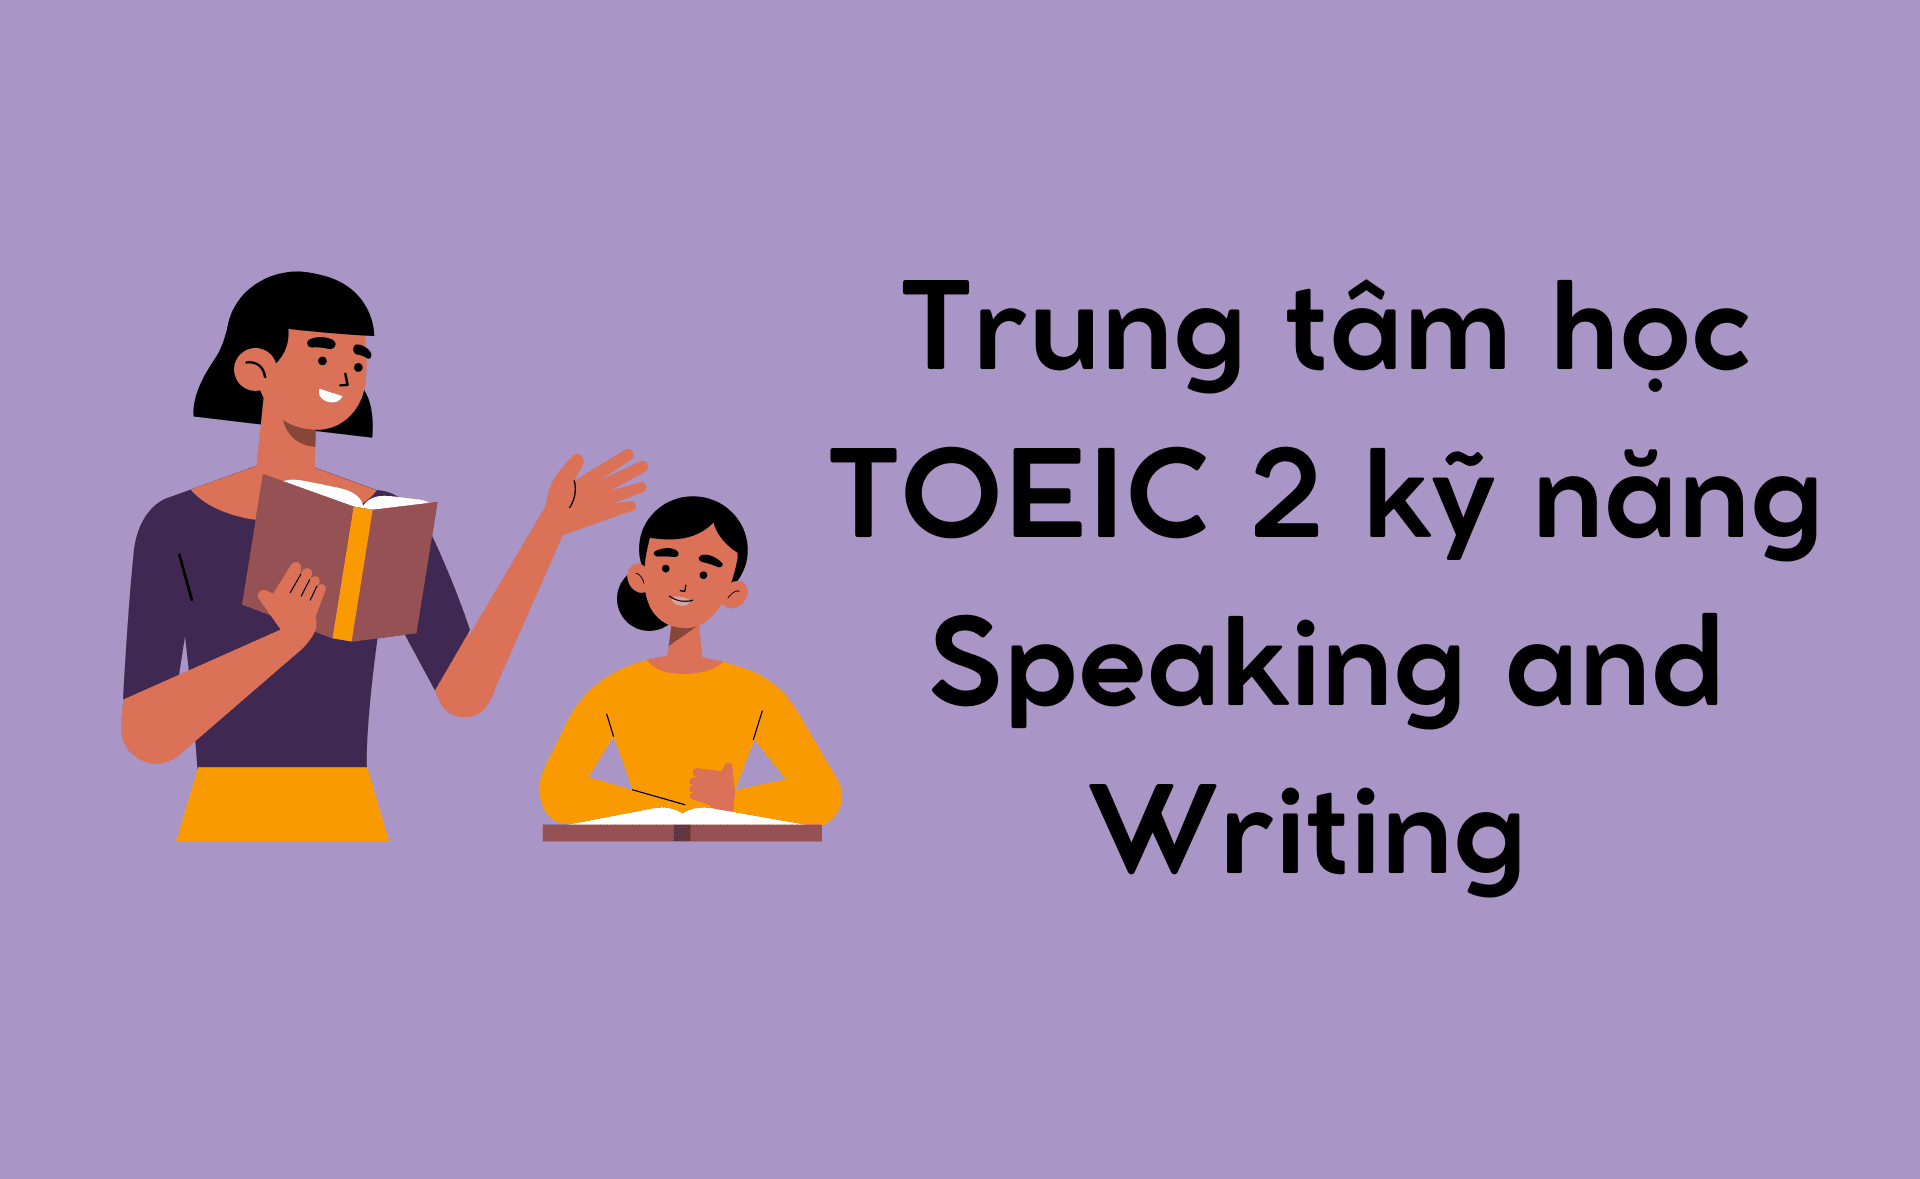 TOEIC 2 kỹ năng Speaking and Writing